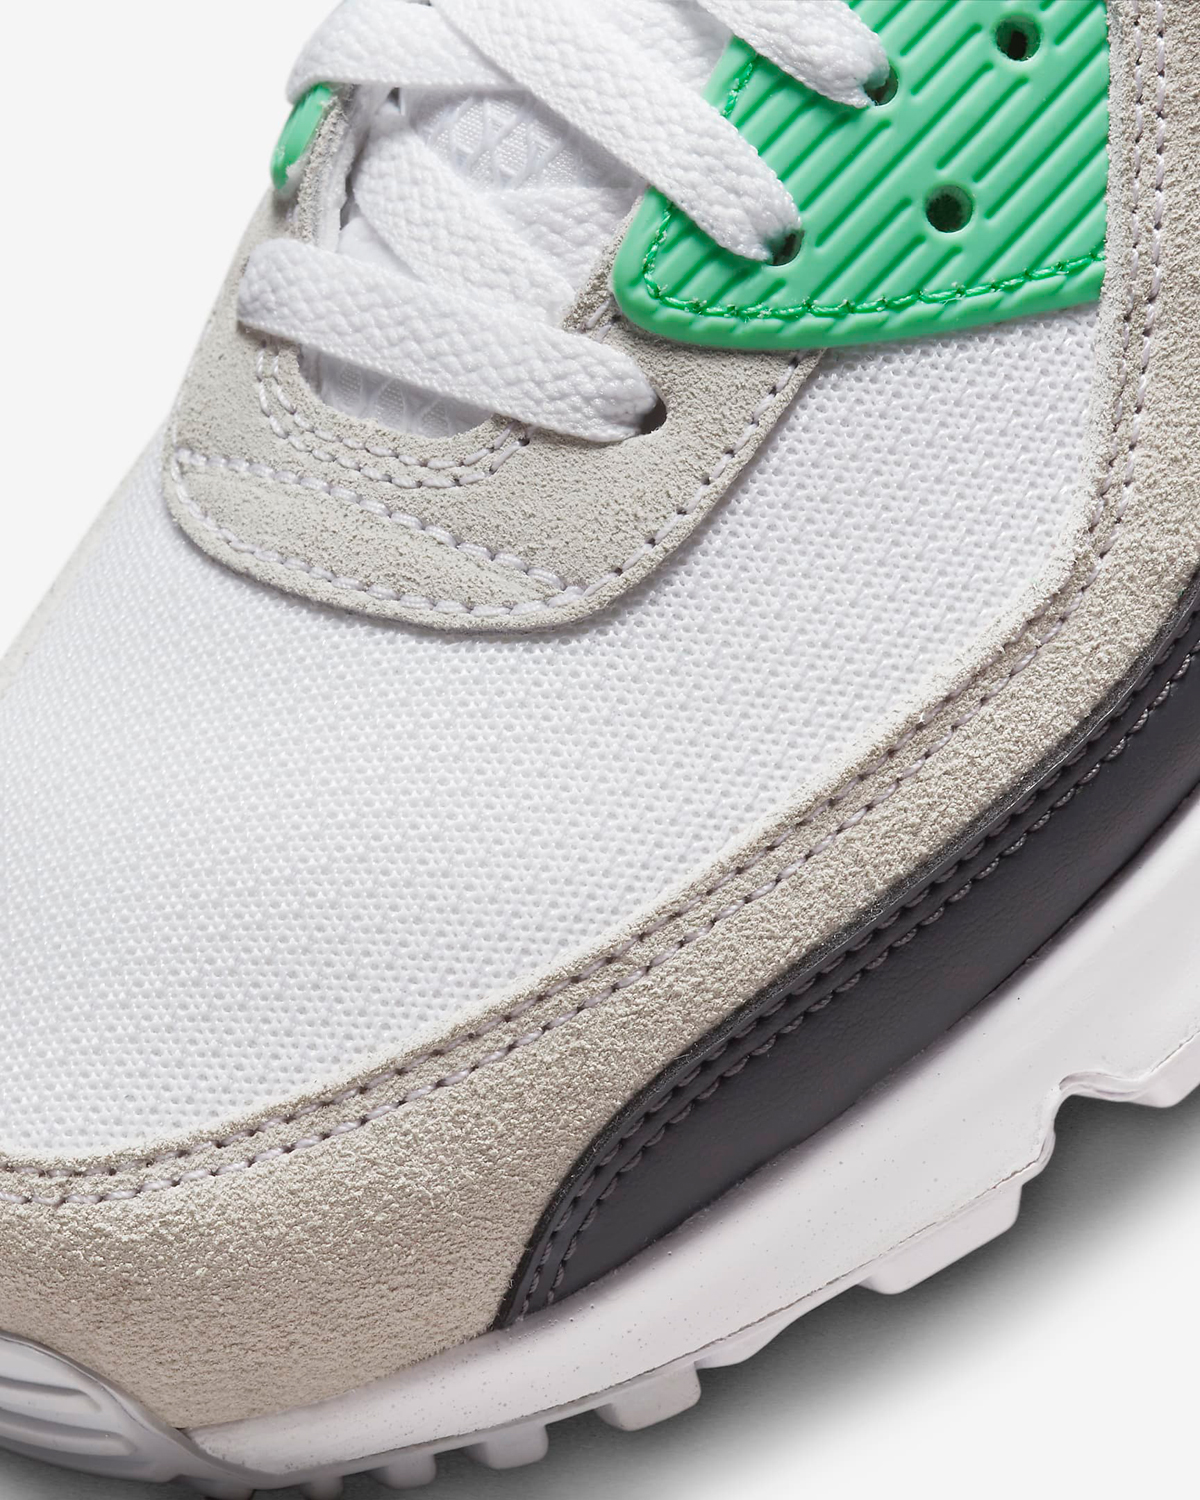 Nike-Air-Max-90-Lucky-Green-Release-Date-Info-7